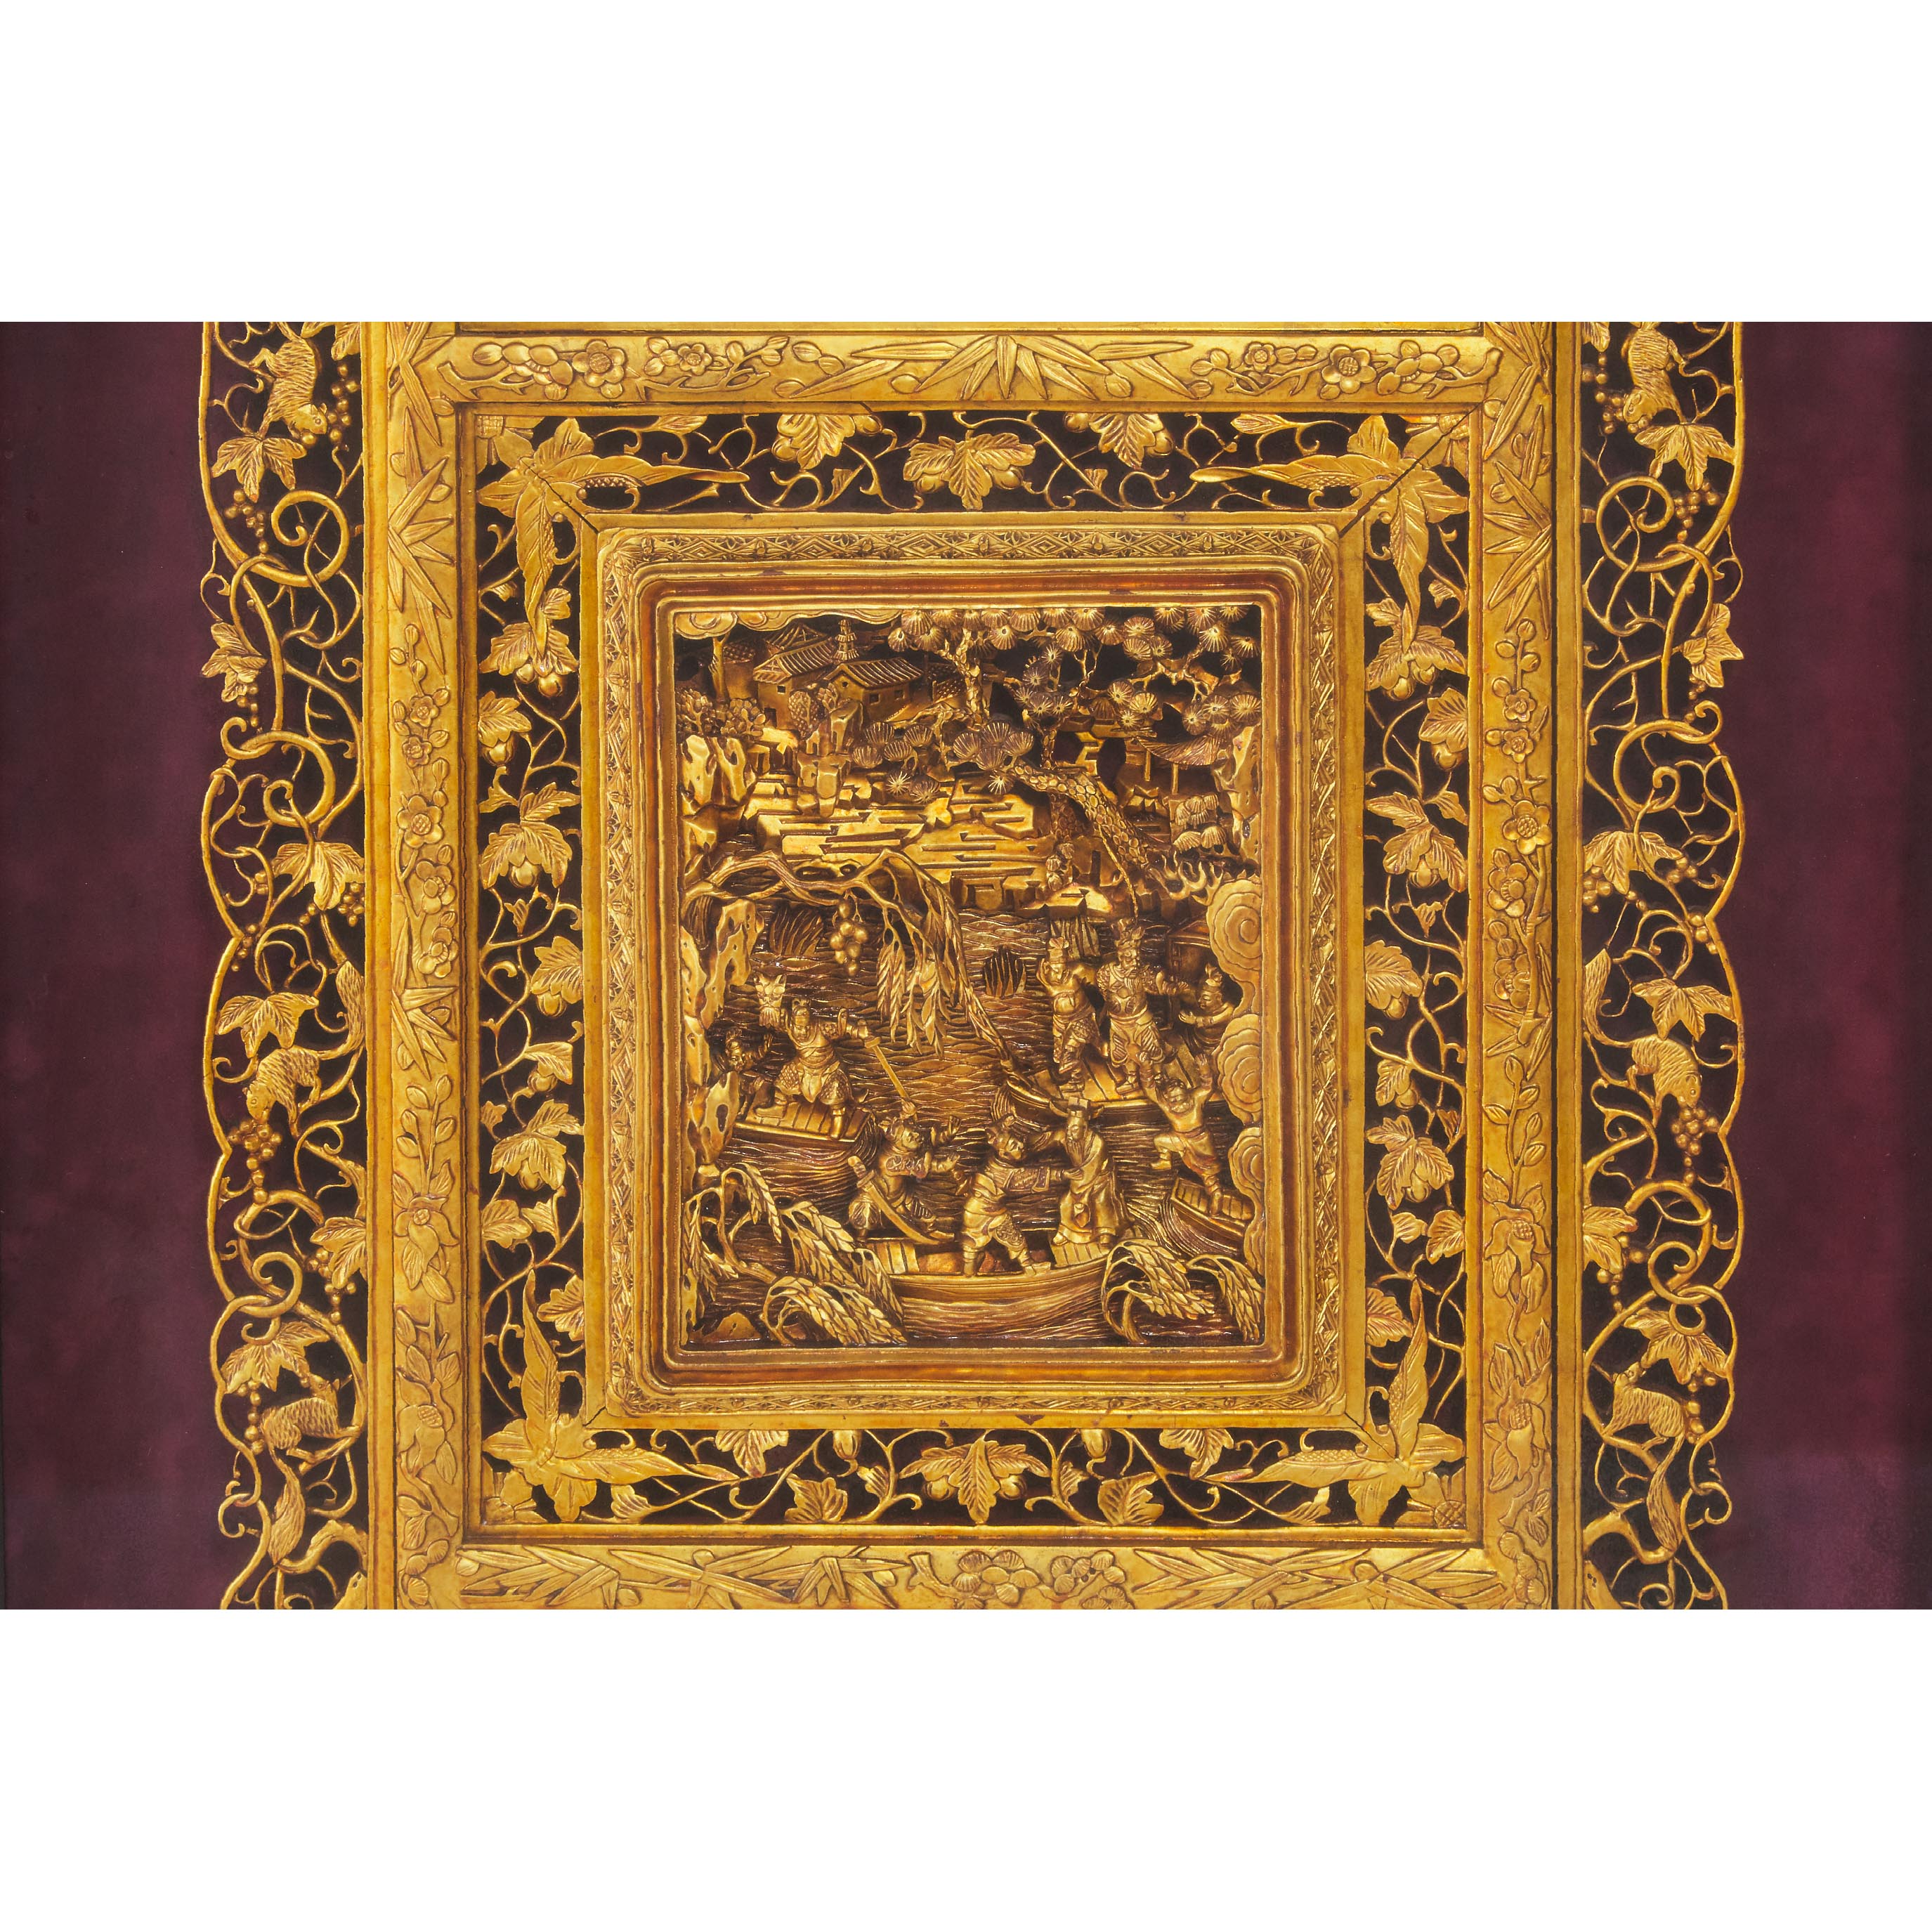 A Pair of Large Framed Chinese Gilt Wood Temple Carvings, 19th Century